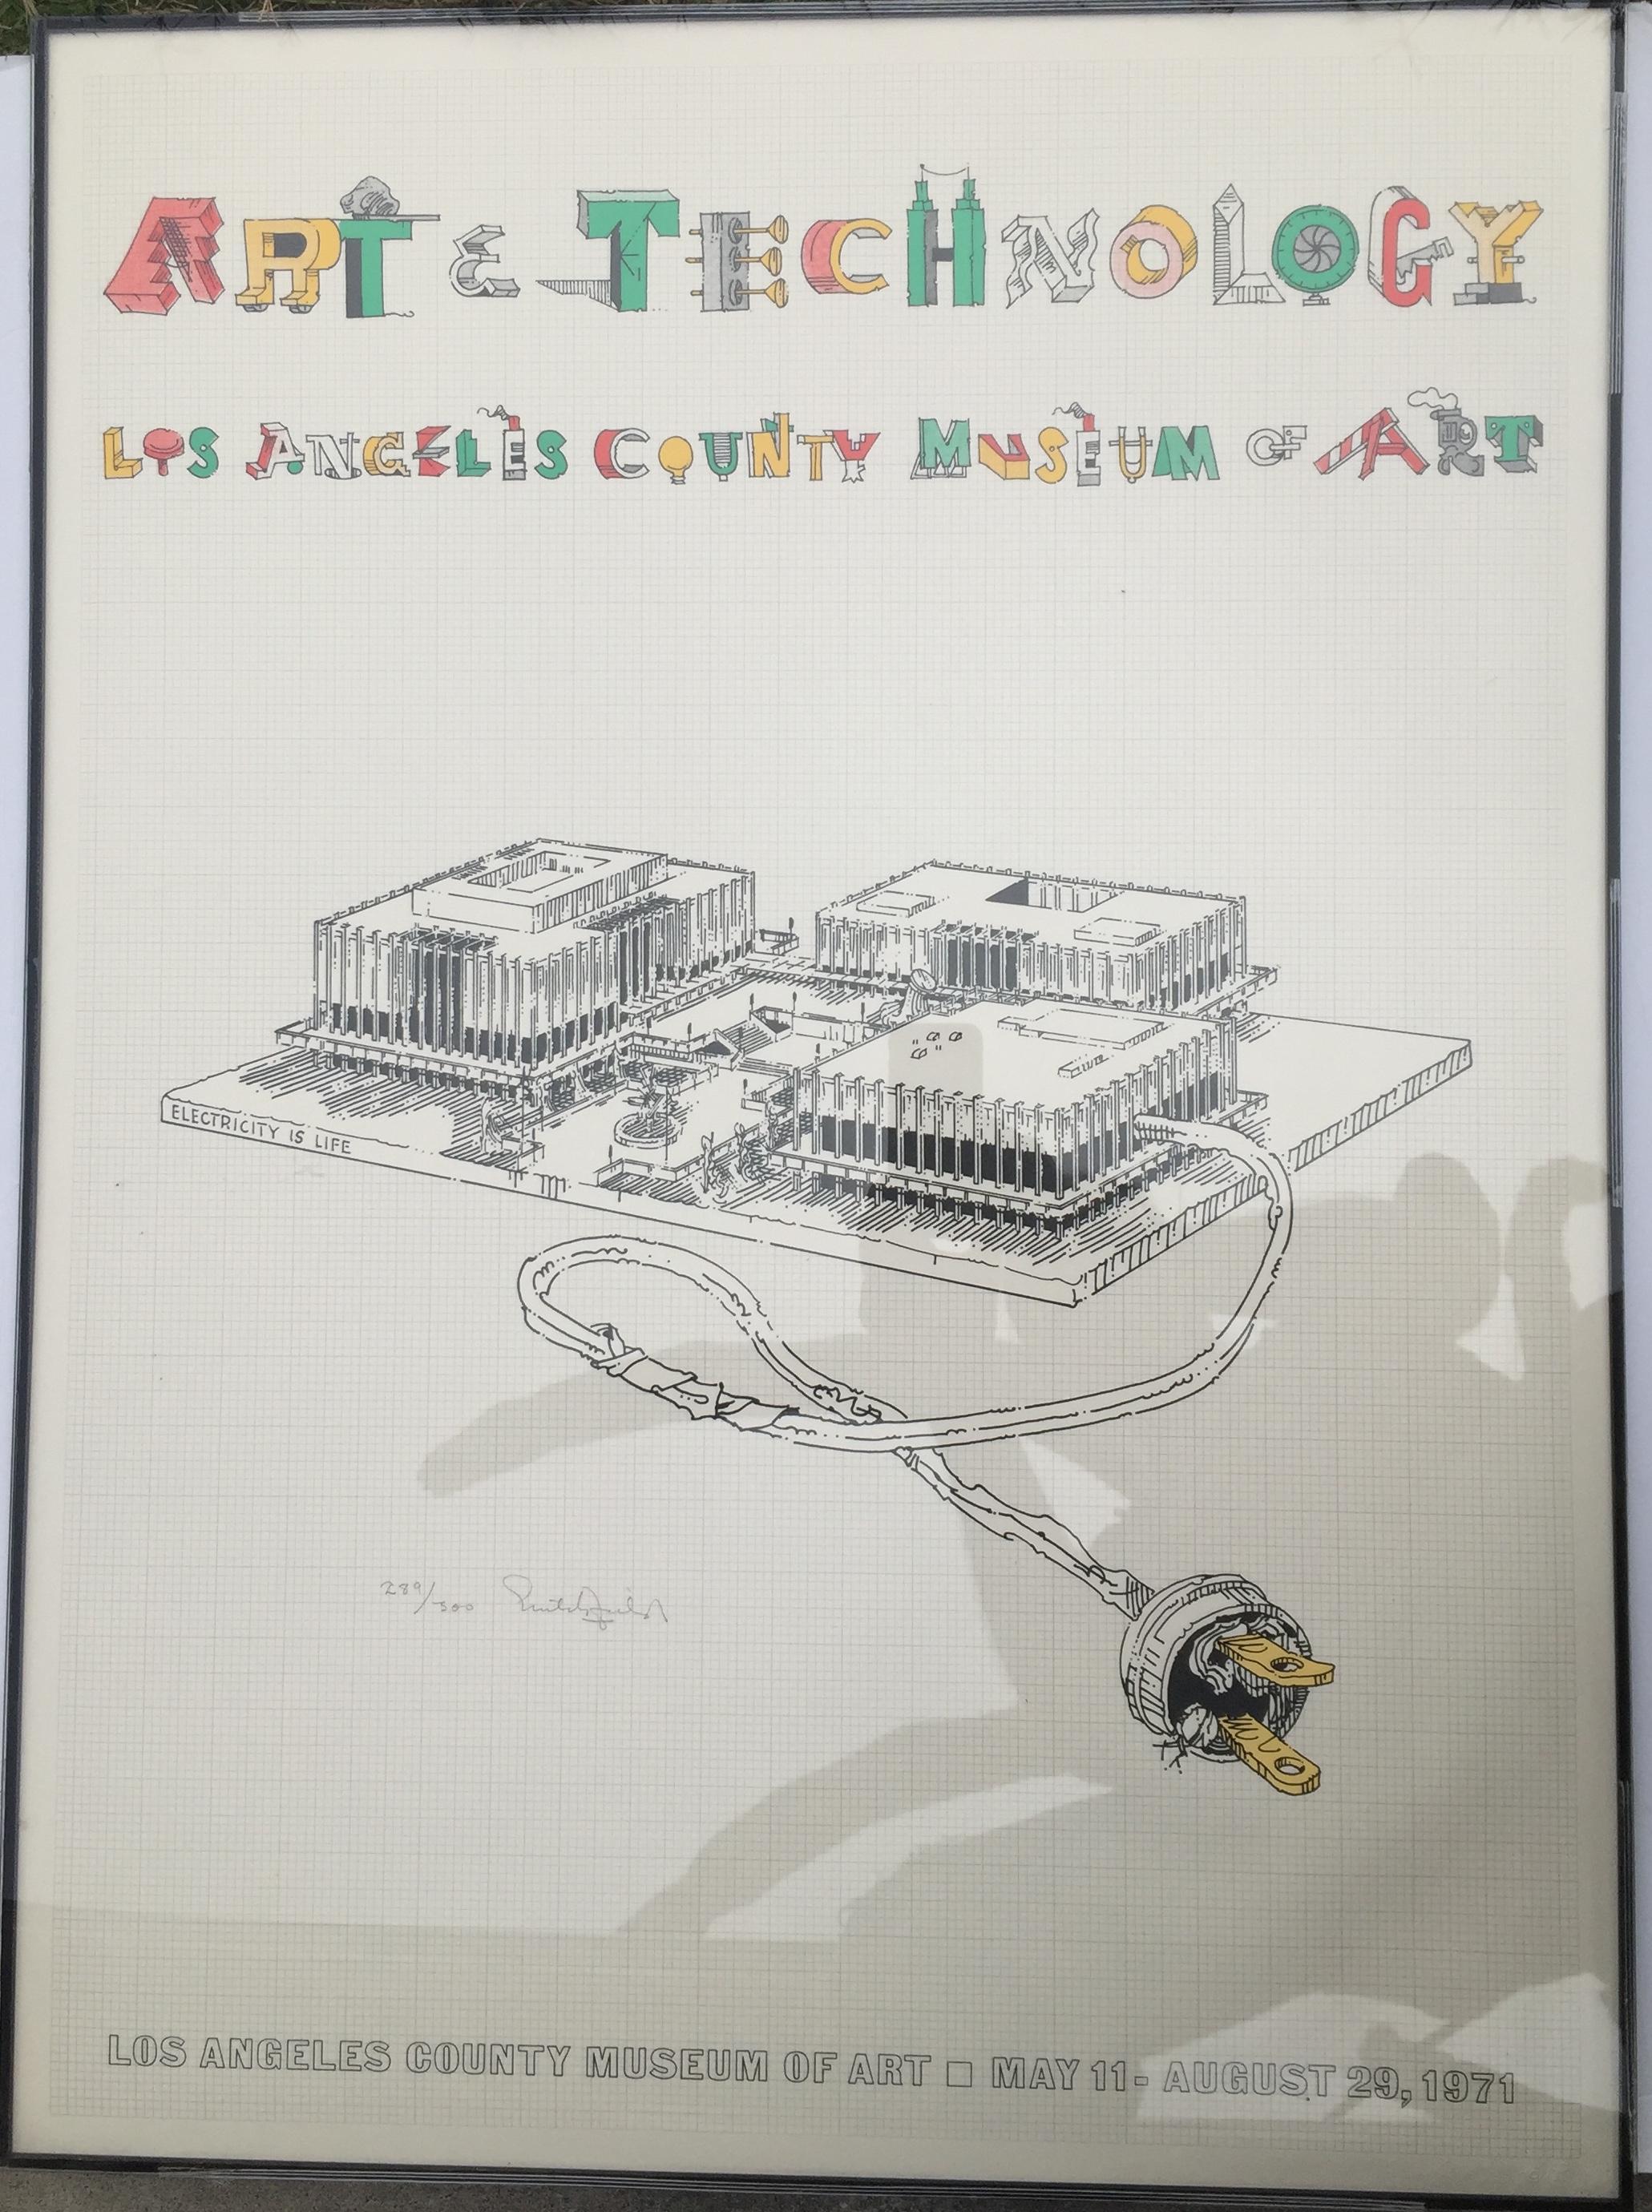 ART & TECHNOLOGY-LOS ANGELES COUNTY MUSEUM OF ART Being demolished as we speak!! - Print by William Crutchfield